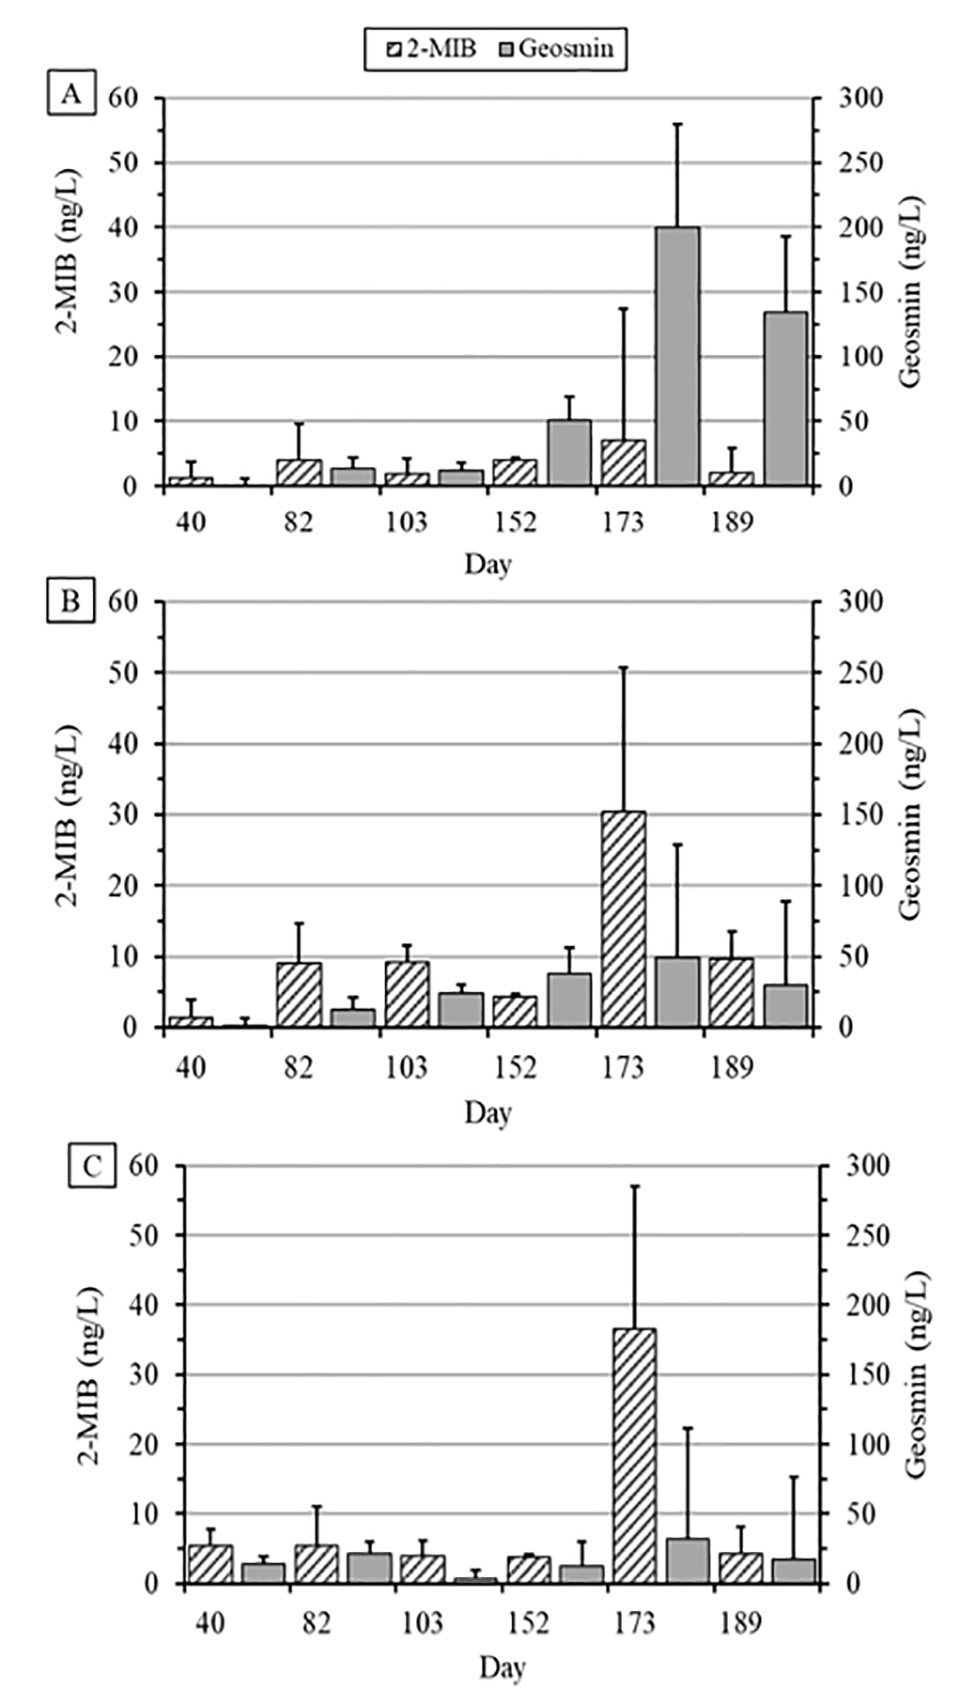 Fig. 2: Least squares mean concentrations (± SE) over time in tank water of 2-methylisoborneol (MIB, left axis) and geosmin (right axis) in New (A), Old-Lo (B) and Old-Hi (C) treatment biofloc technology production system culture units stocked with channel catfish. Error bars are pooled SE. New treatment geosmin means with different letters are significantly different (P &gt; 0.05). N = 3 replicate tanks.